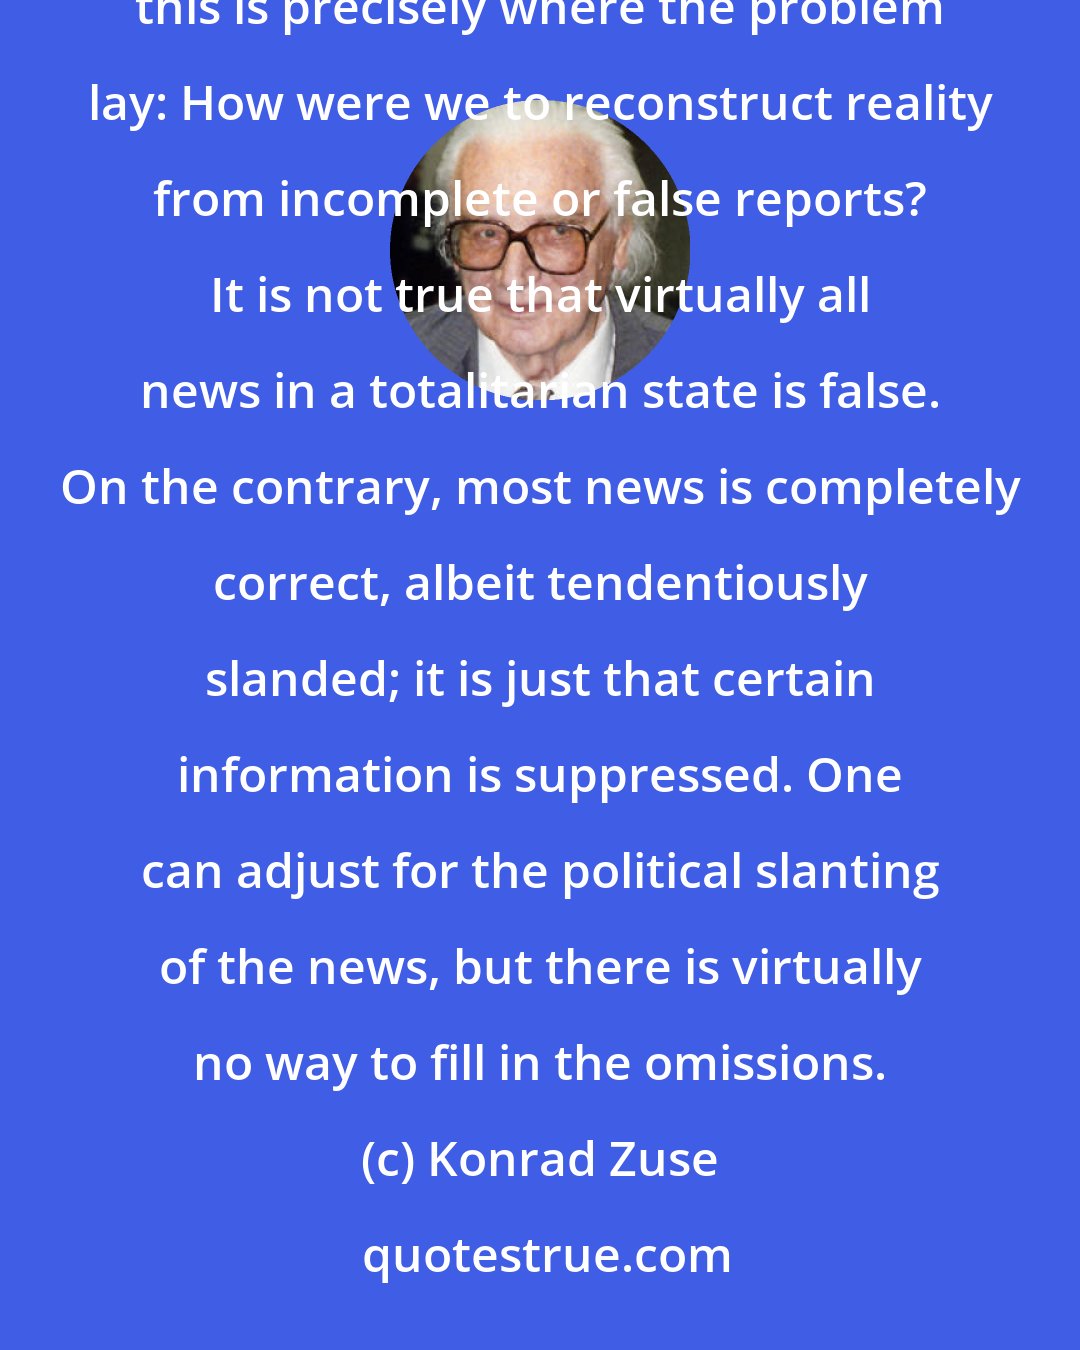 Konrad Zuse: Of course, we knew that the official reports were sketchy, if not falsified. But, in terms of information theory, this is precisely where the problem lay: How were we to reconstruct reality from incomplete or false reports? It is not true that virtually all news in a totalitarian state is false. On the contrary, most news is completely correct, albeit tendentiously slanded; it is just that certain information is suppressed. One can adjust for the political slanting of the news, but there is virtually no way to fill in the omissions.